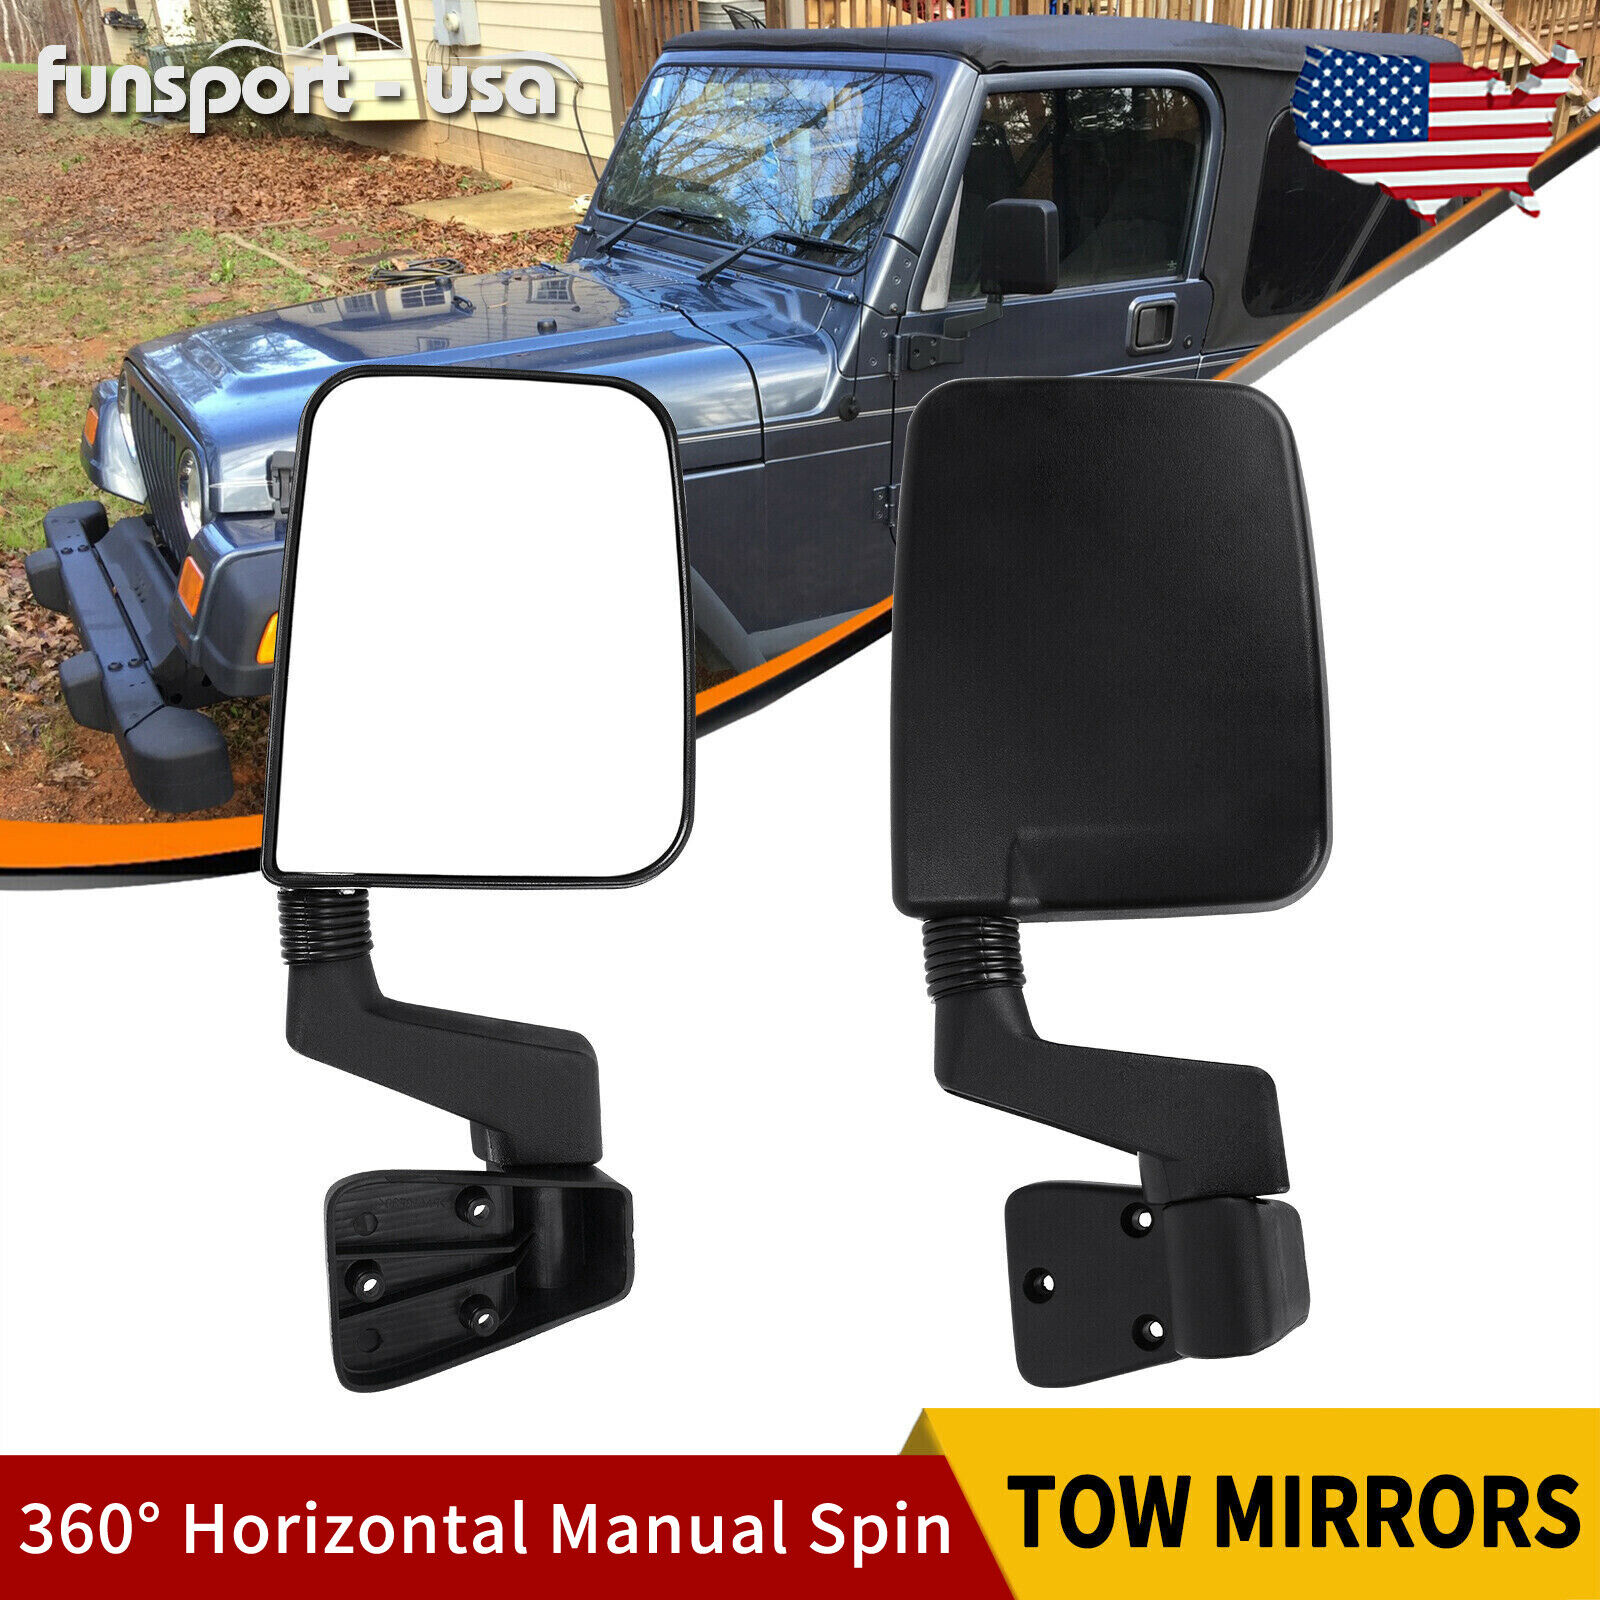 Manual Adjust Passenger + Driver Side Tow Mirrors for 1987-2002 Jeep Wrangler